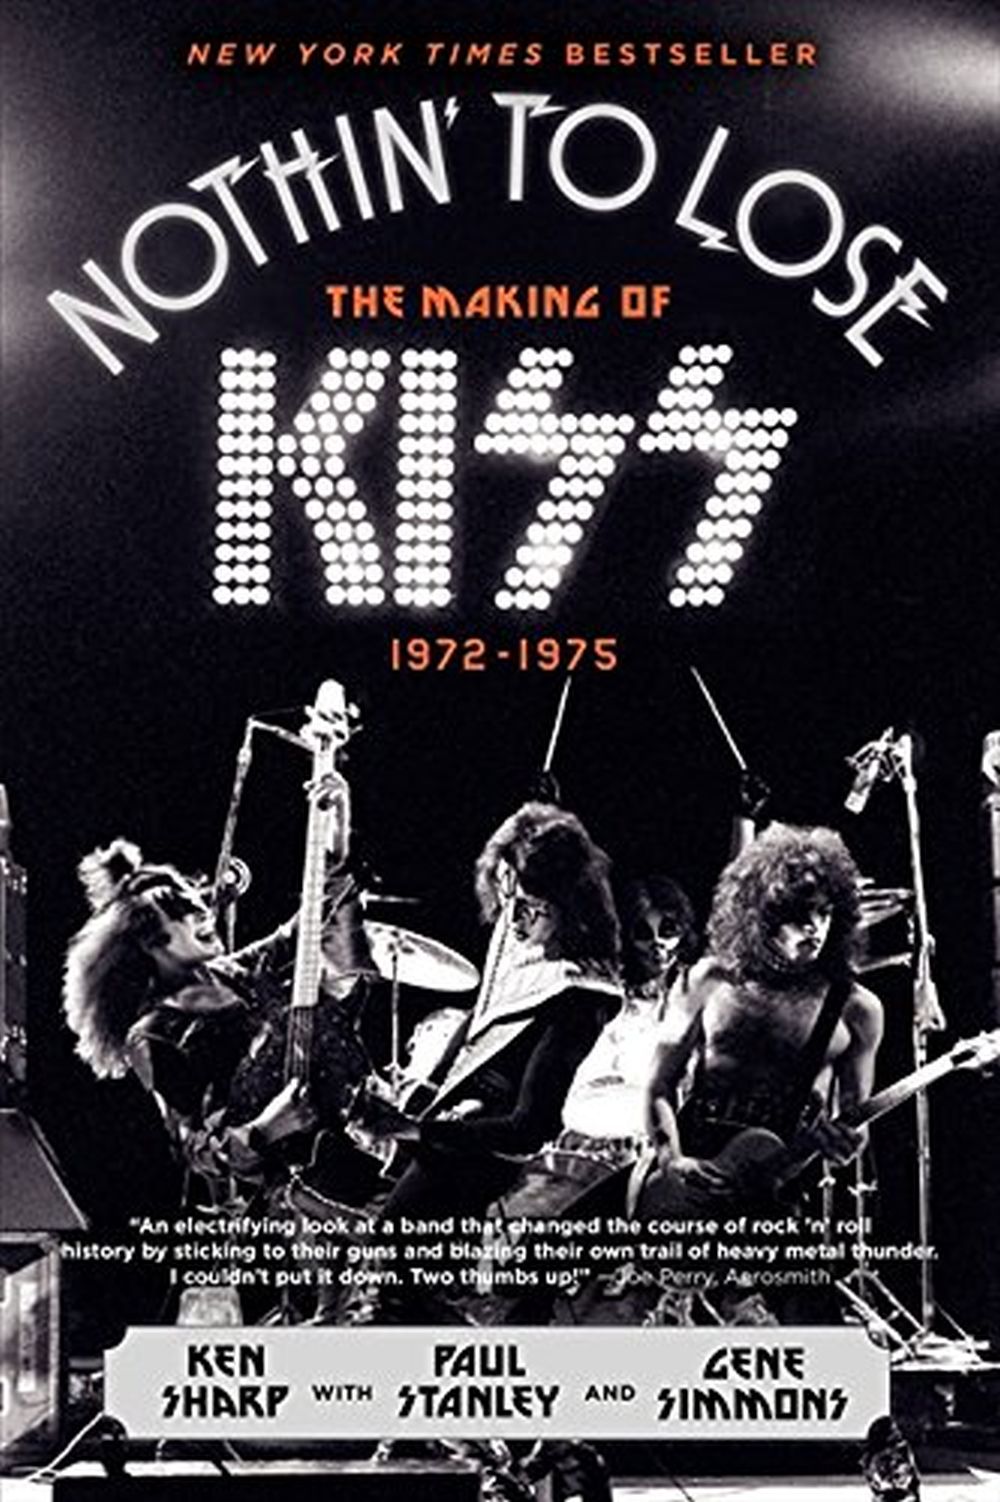 Kiss - Sharp, Ken with Paul Stanley & Gene Simmons - Nothin' To Lose: The Making Of Kiss 1972-1975 (PB) - Book - New